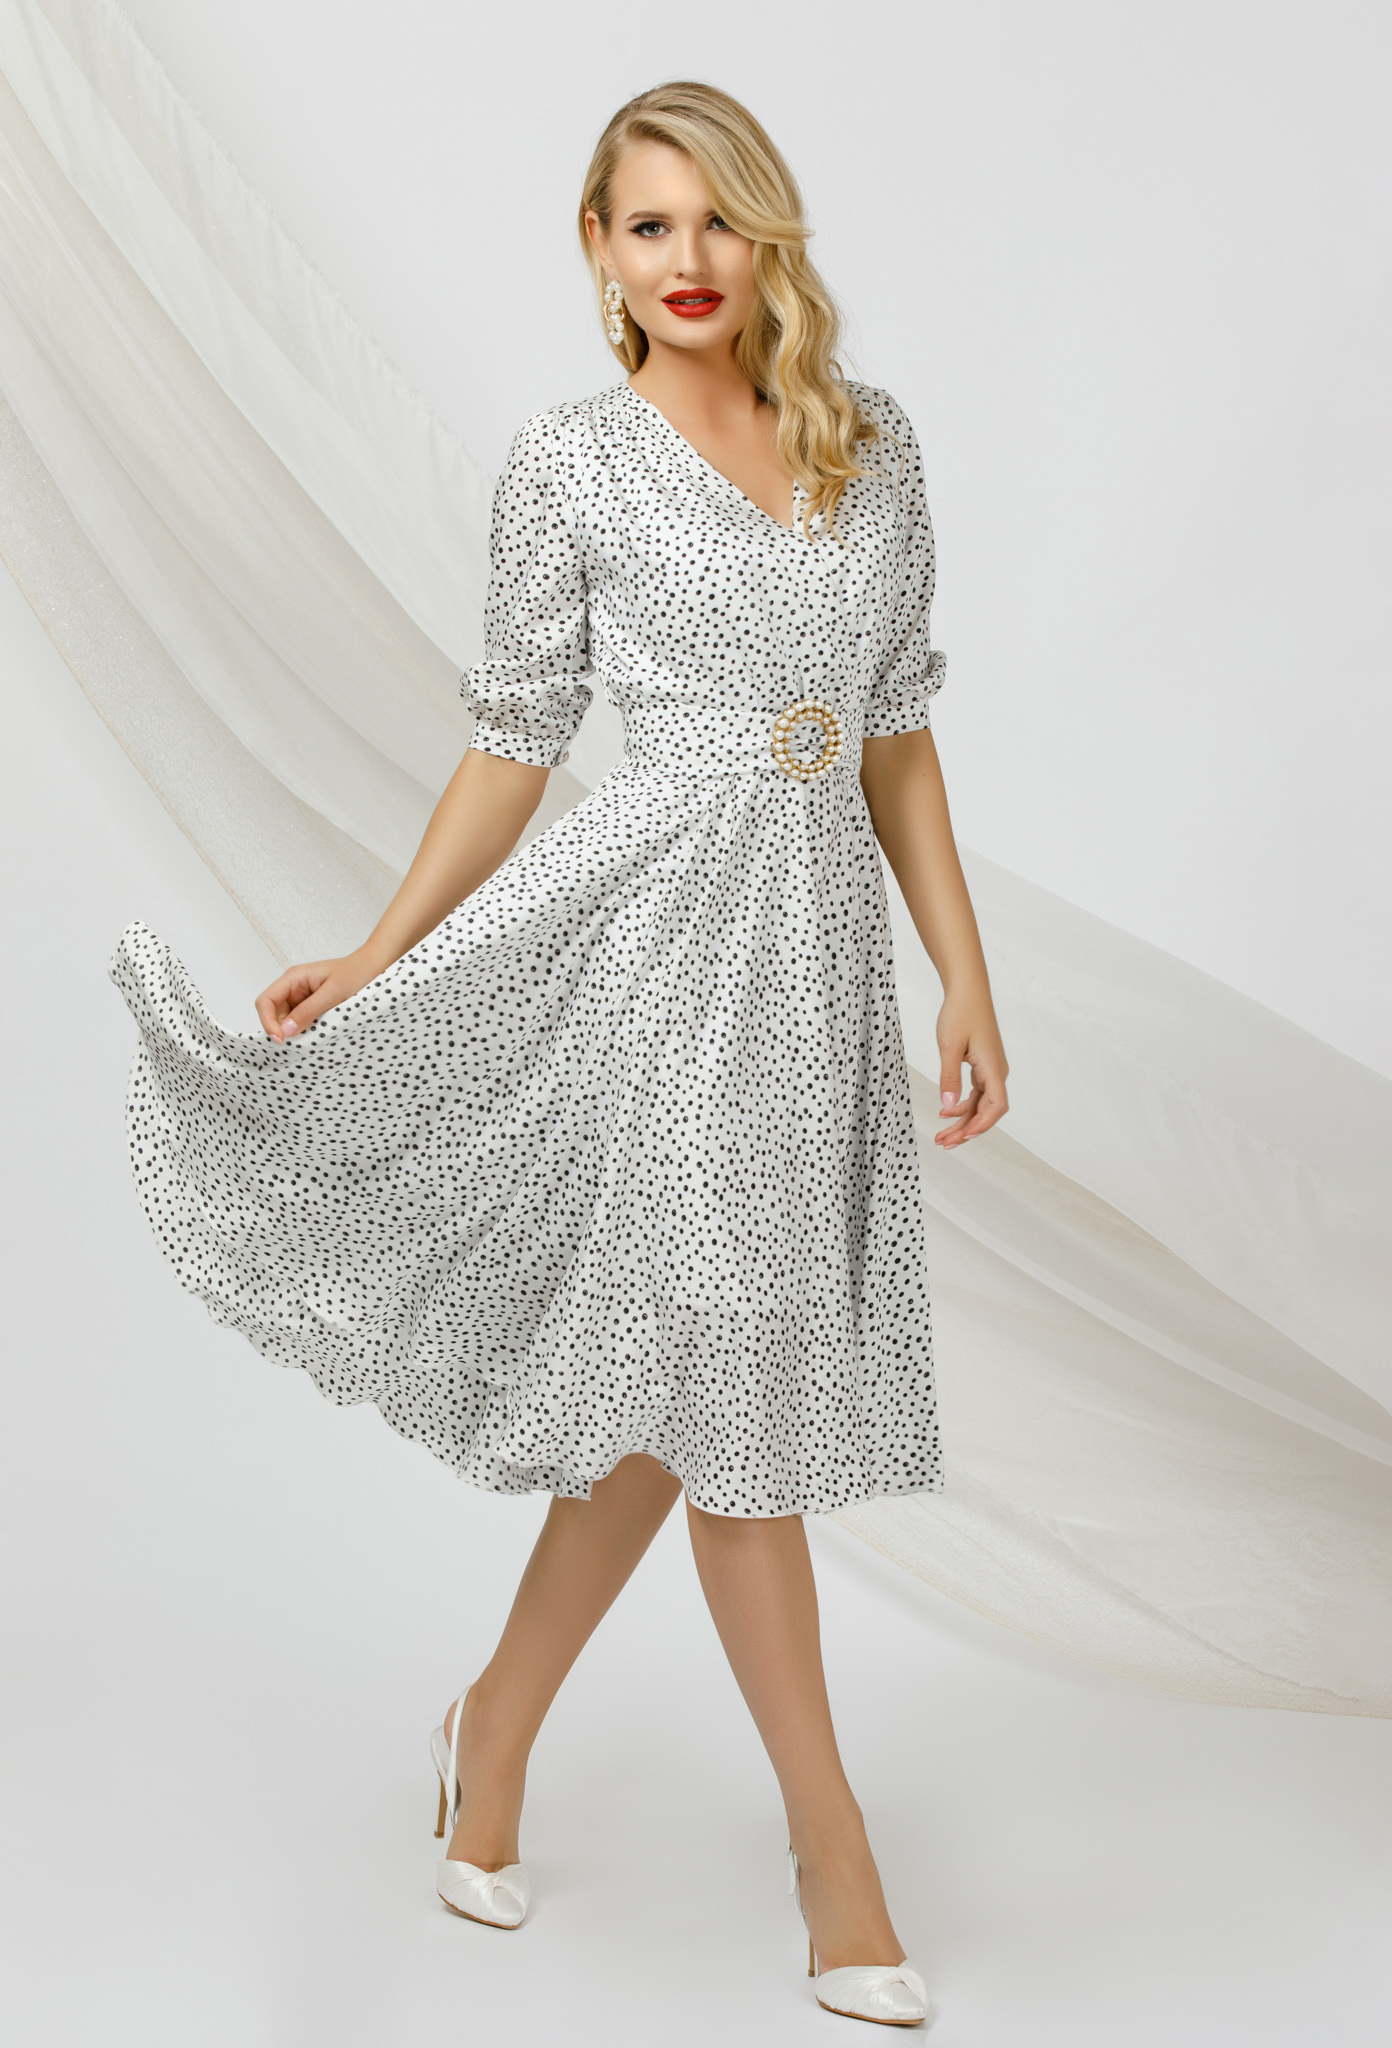 Dress midi cloche occasional airy fabric from satin fabric texture dots print metallic buckle